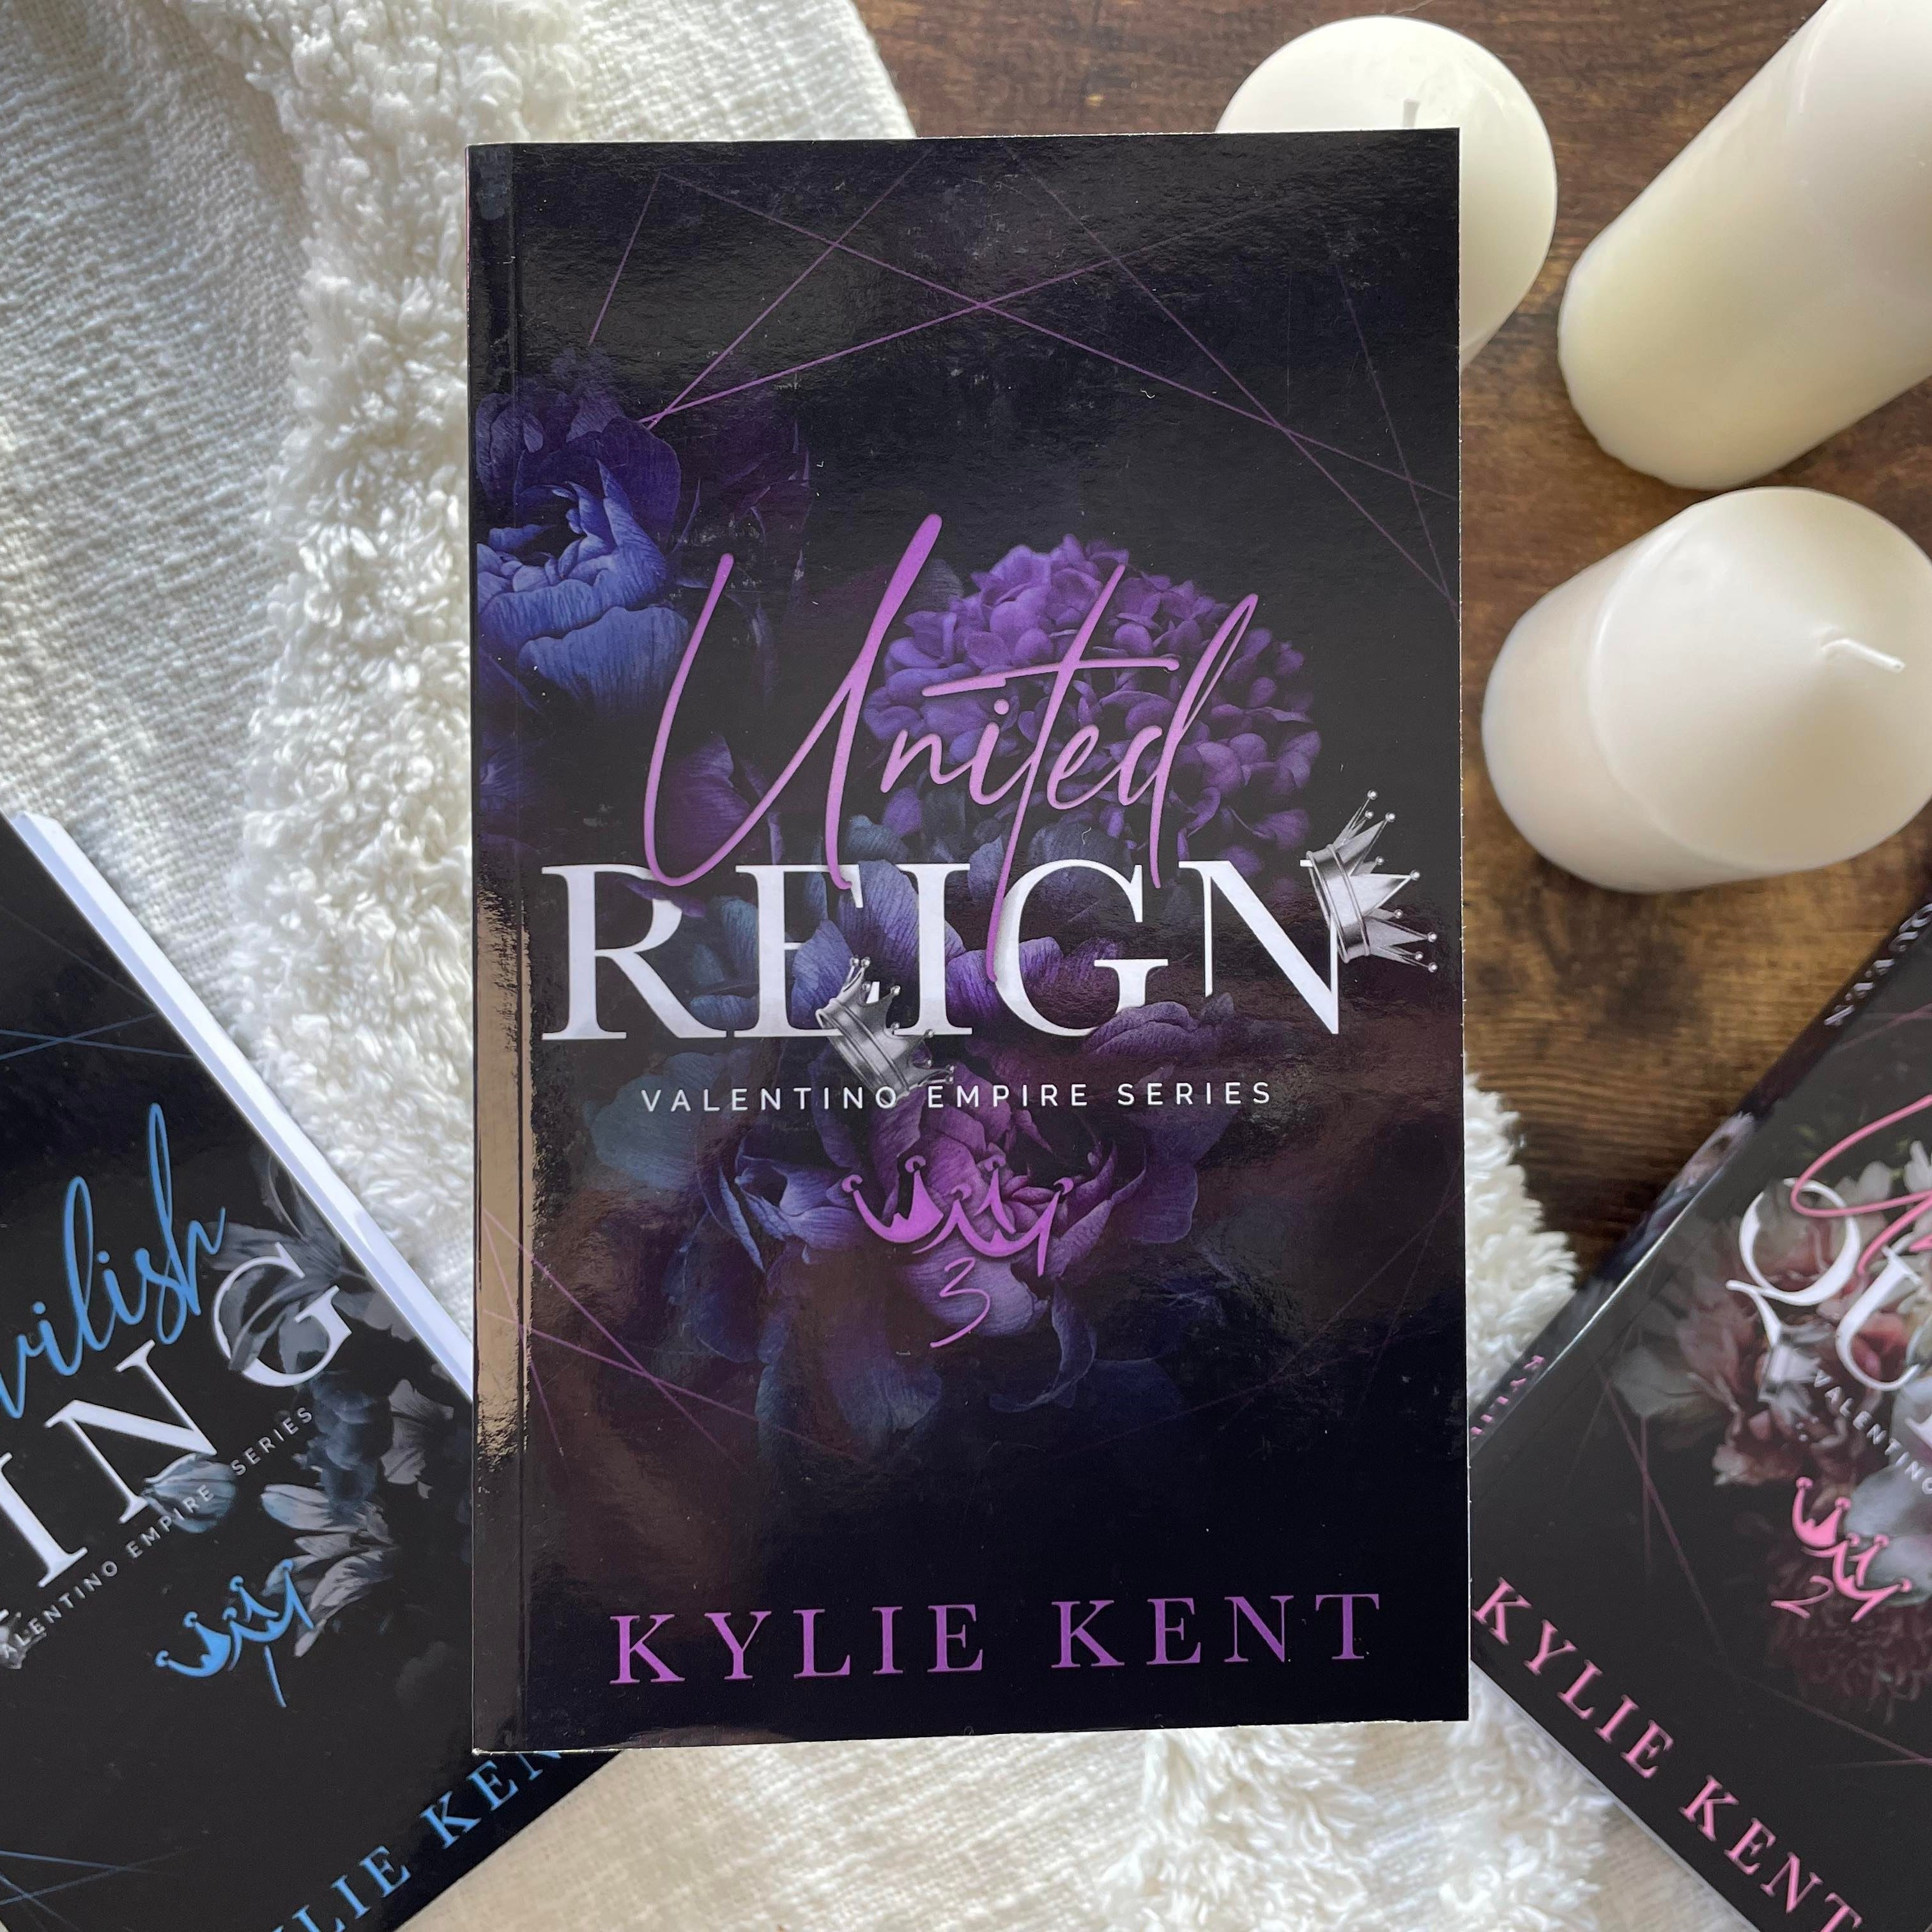 Valentino Empire series by Kylie Kent